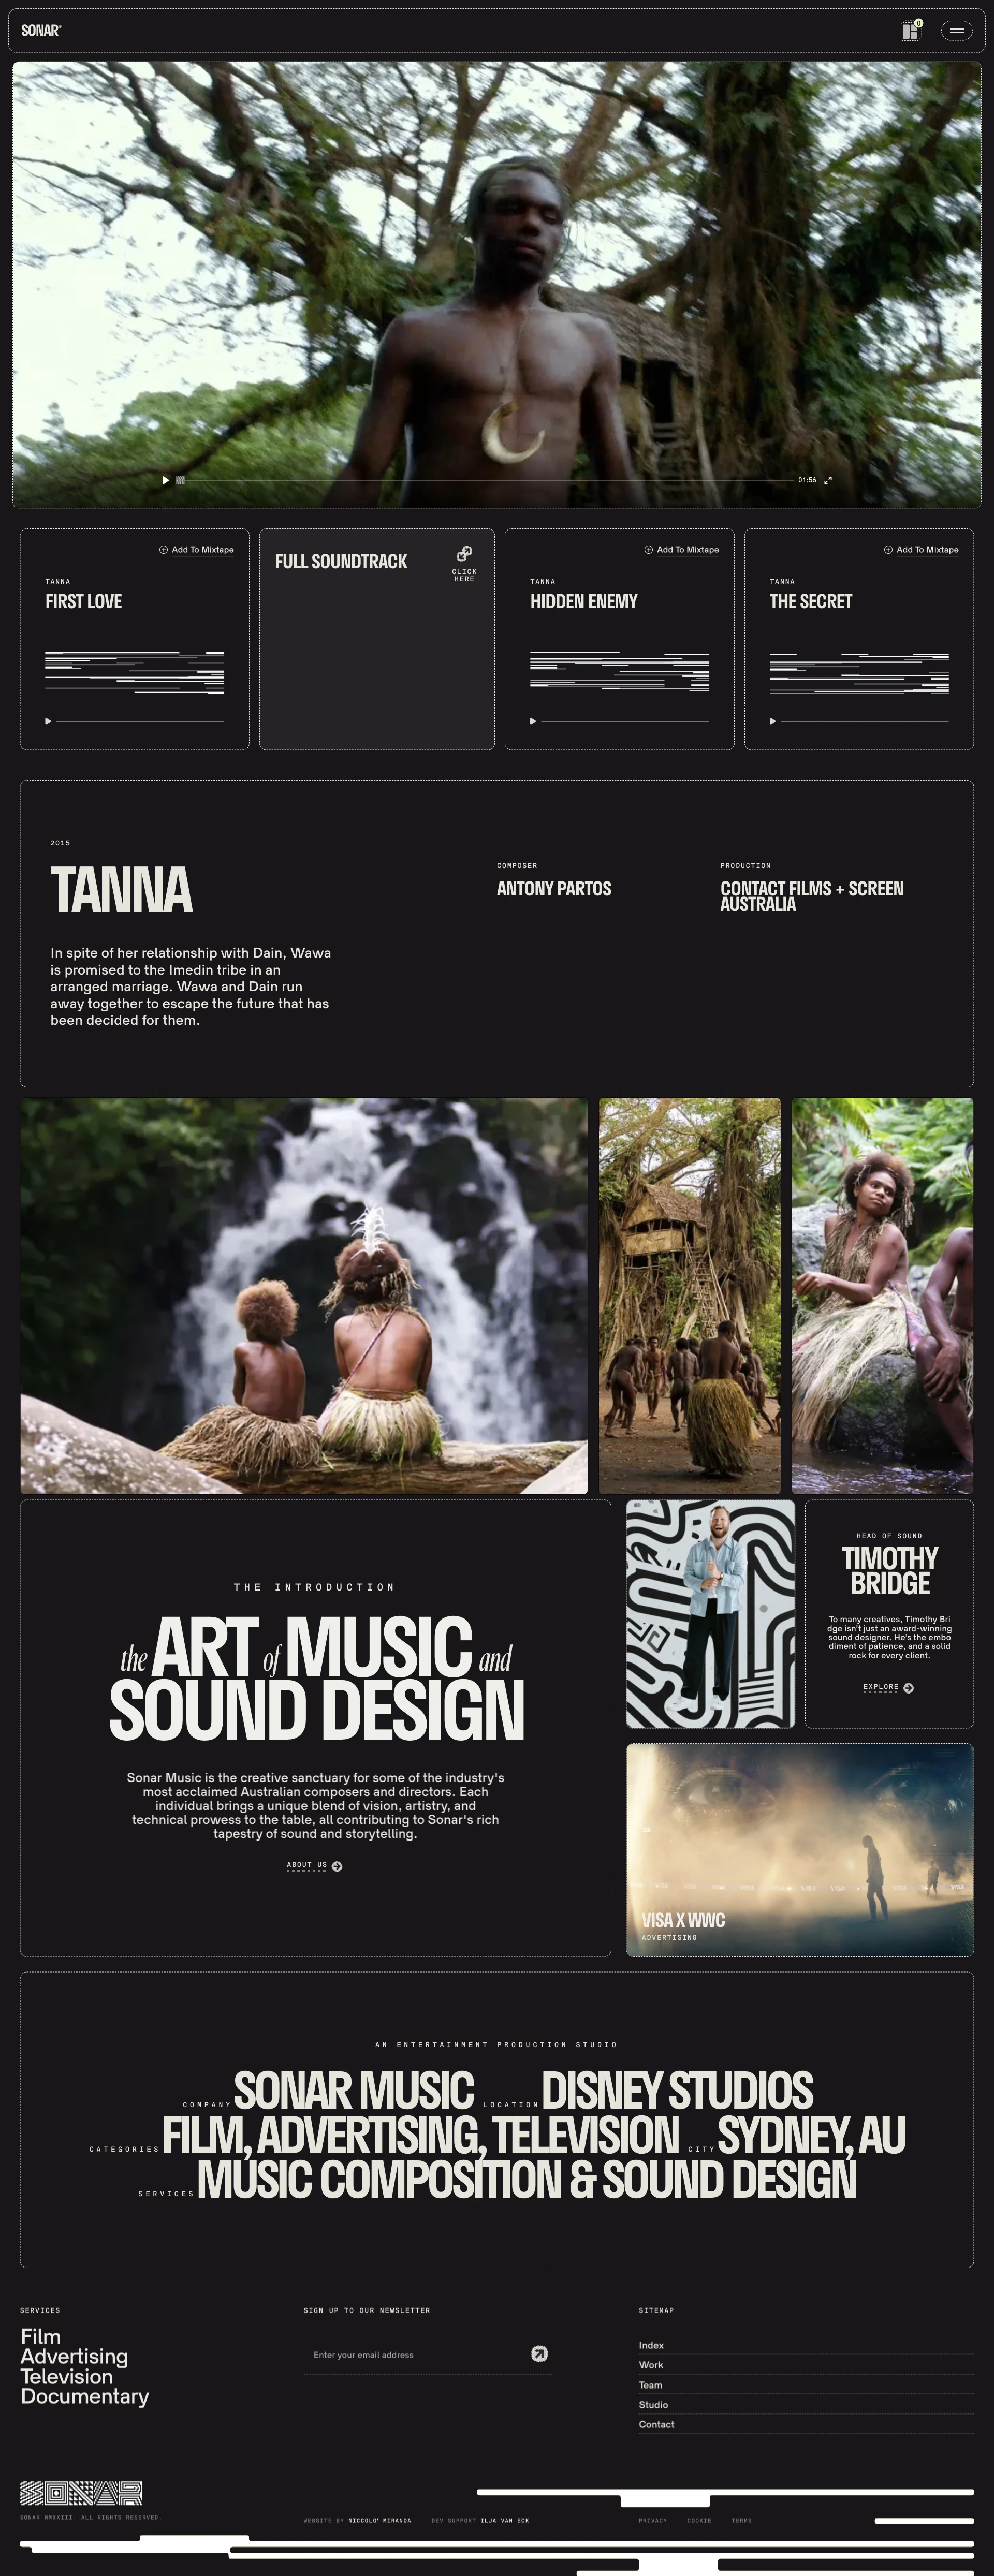 Sonar Landing Page Example: Sonar Music is a renowned music and sound studio based in Disney Studios, Australia, that houses the nation's most distinguished composers and sound designers.